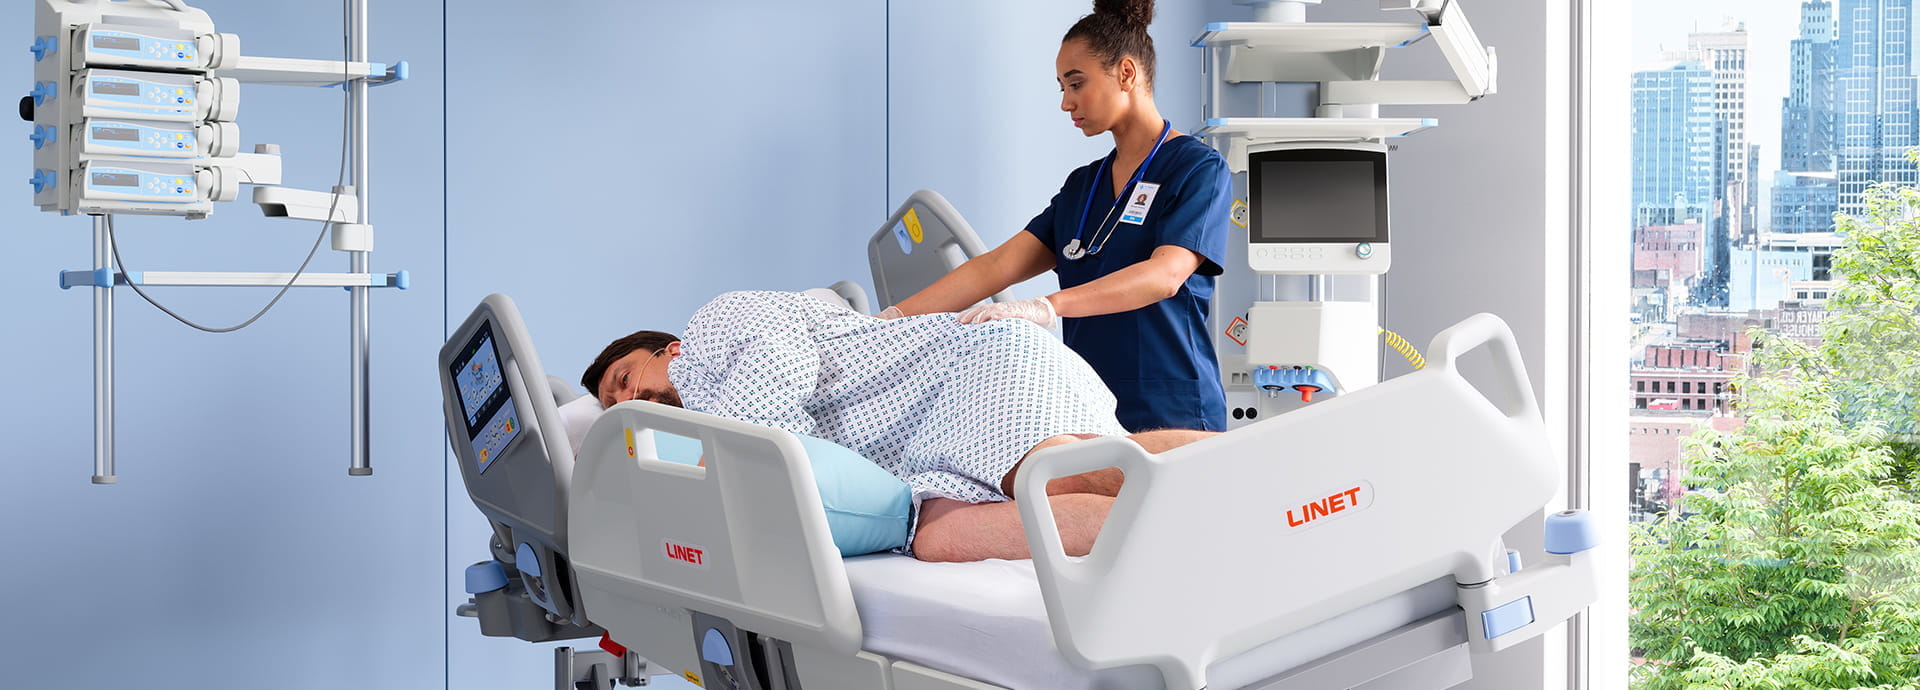 multicare X - The first-class intensive care bed from wissner-bosserhoff for intensive care units, developed by nurses for nurses. 